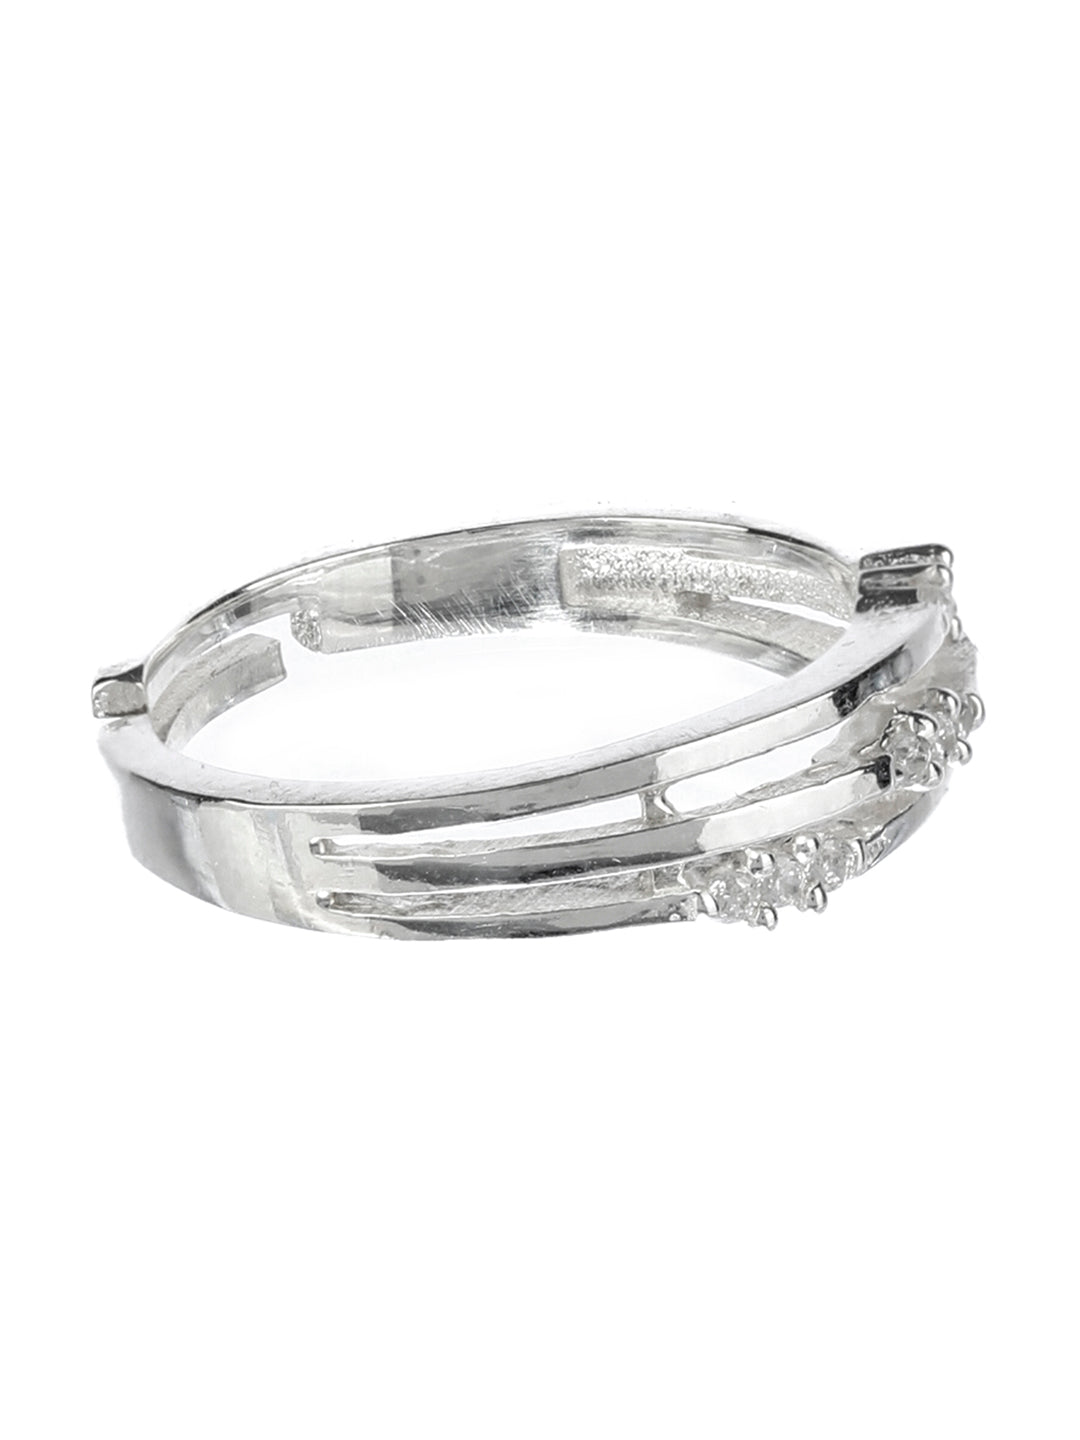 Wrapped Around You Sterling Silver Ring